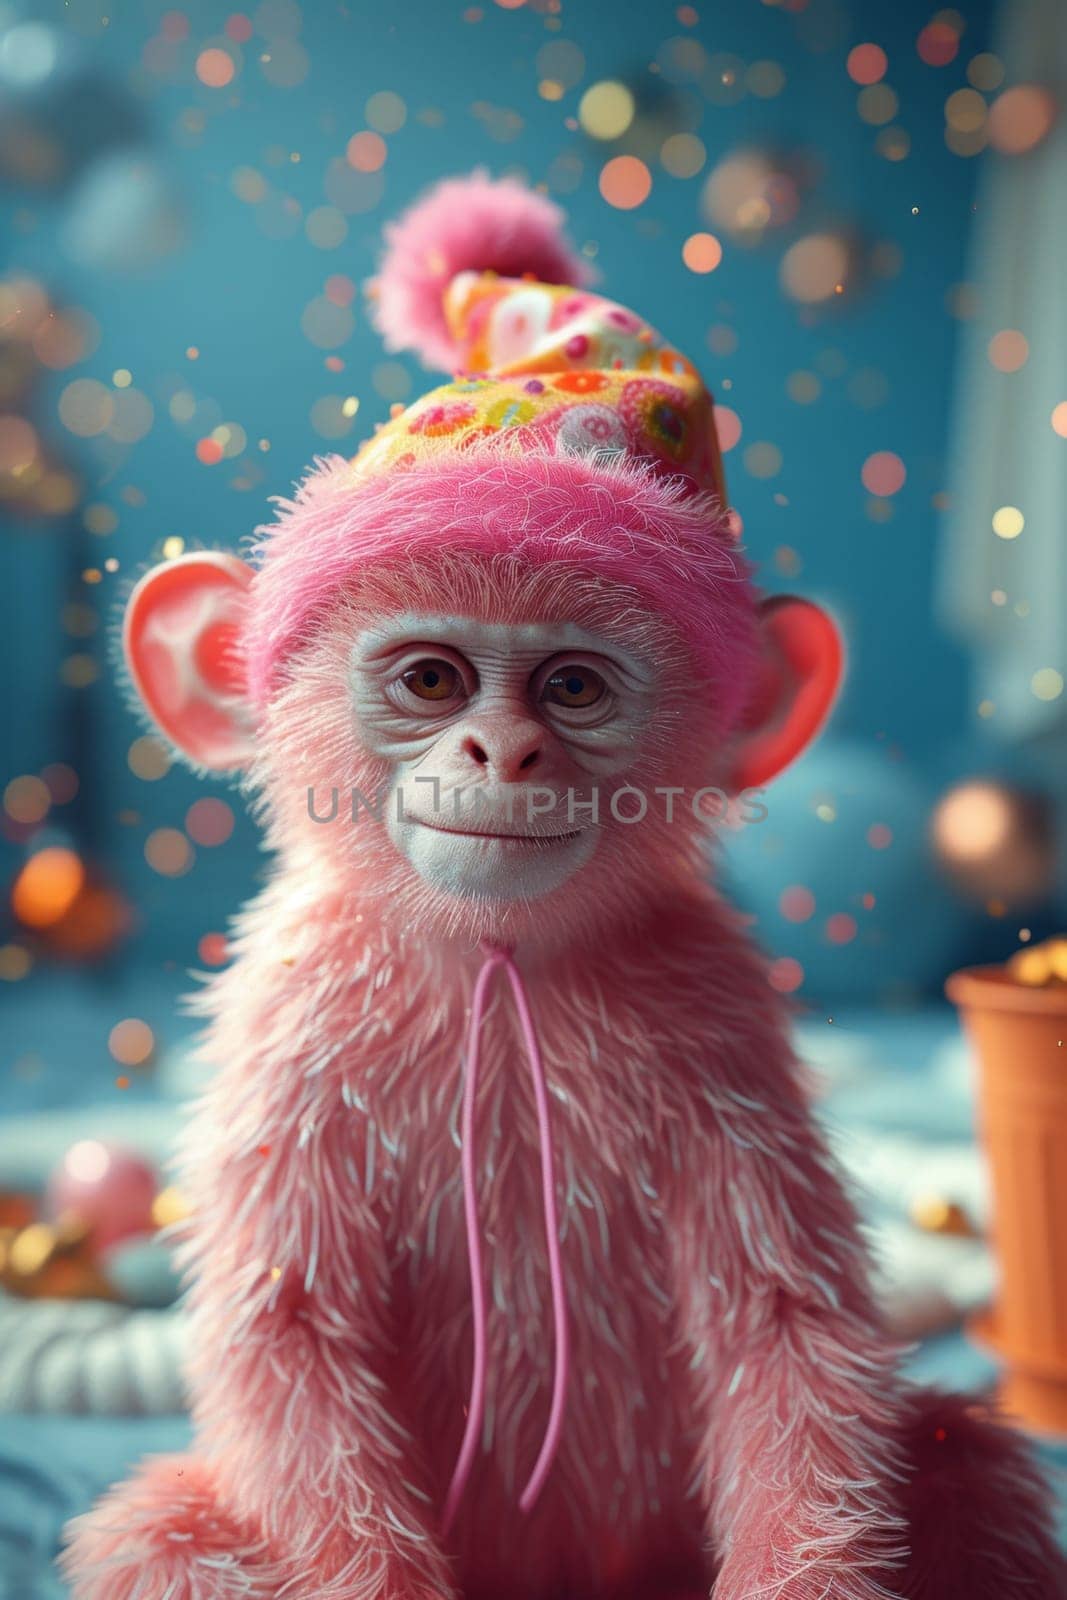 A pink monkey in a warm hat sitting in a blue interior by Lobachad